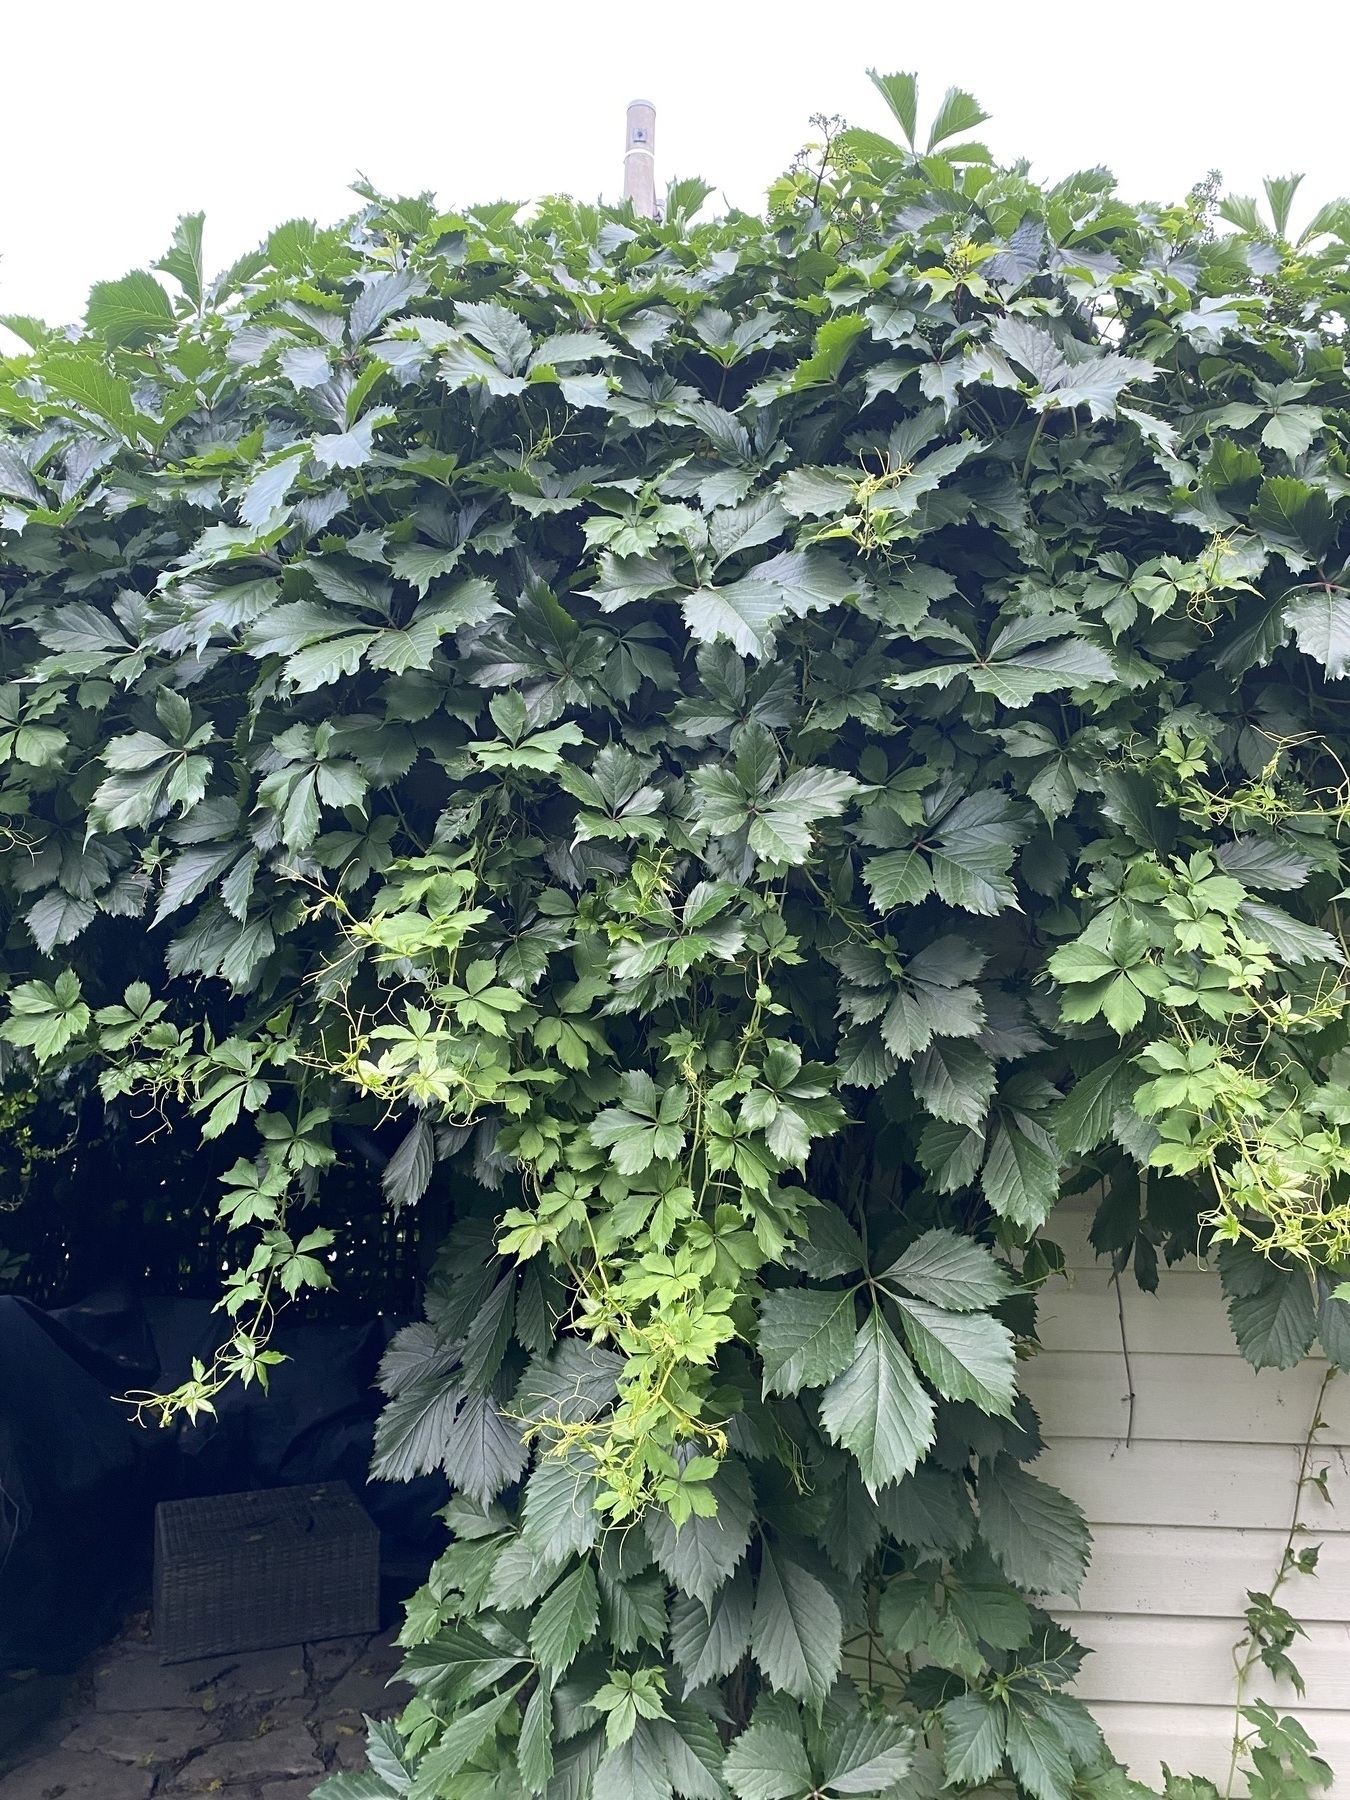 Lush green grapevine leaves cover a wall and pergola, exuding growth and vitality, with a clear sky barely visible above.